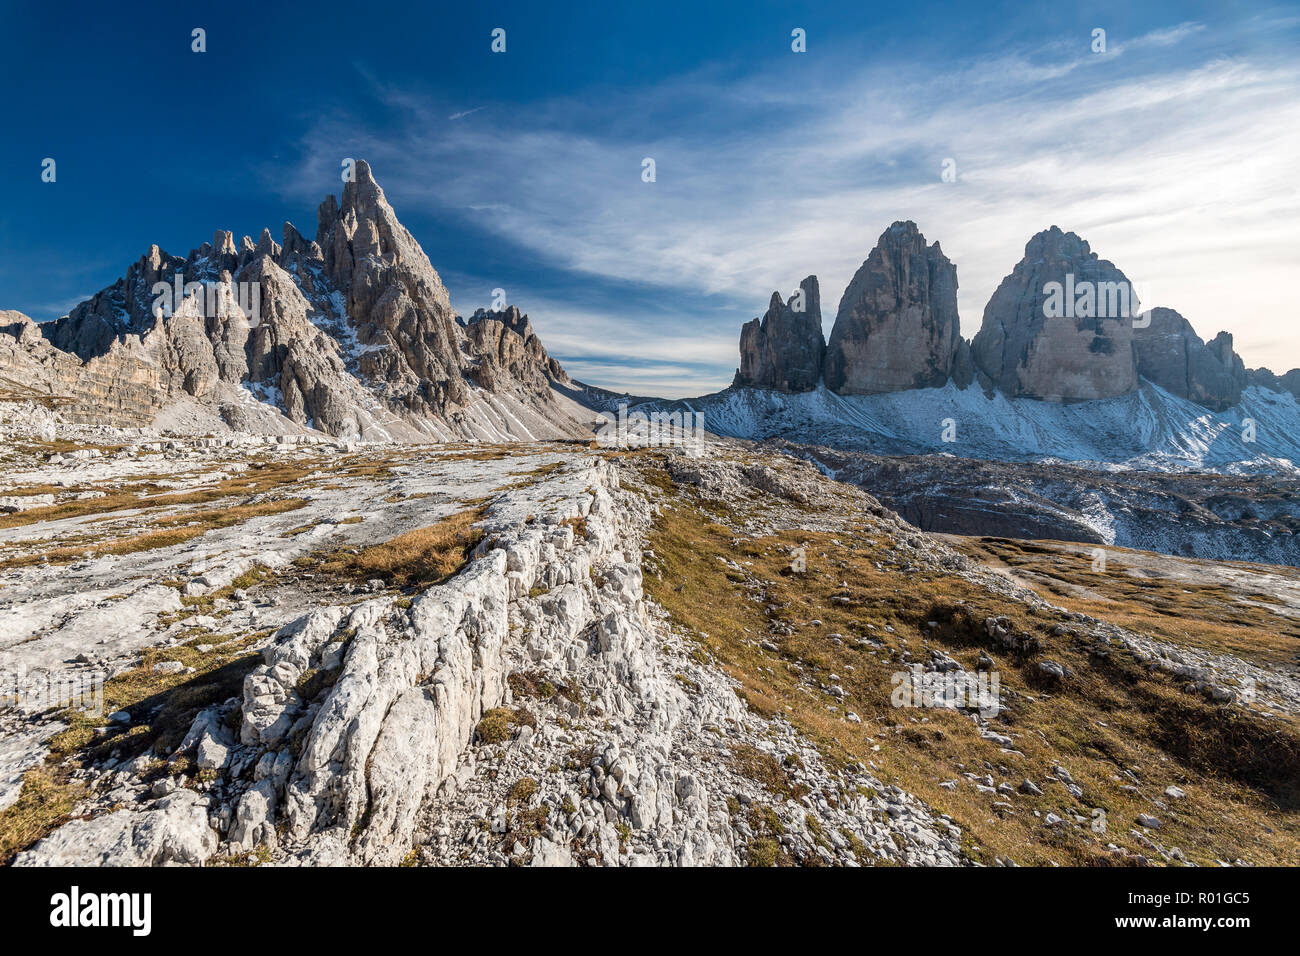 Paternkofel and the Three Peaks, Sexten Dolomites, South Tyrol, Trentino-South Tyrol, Italy Stock Photo